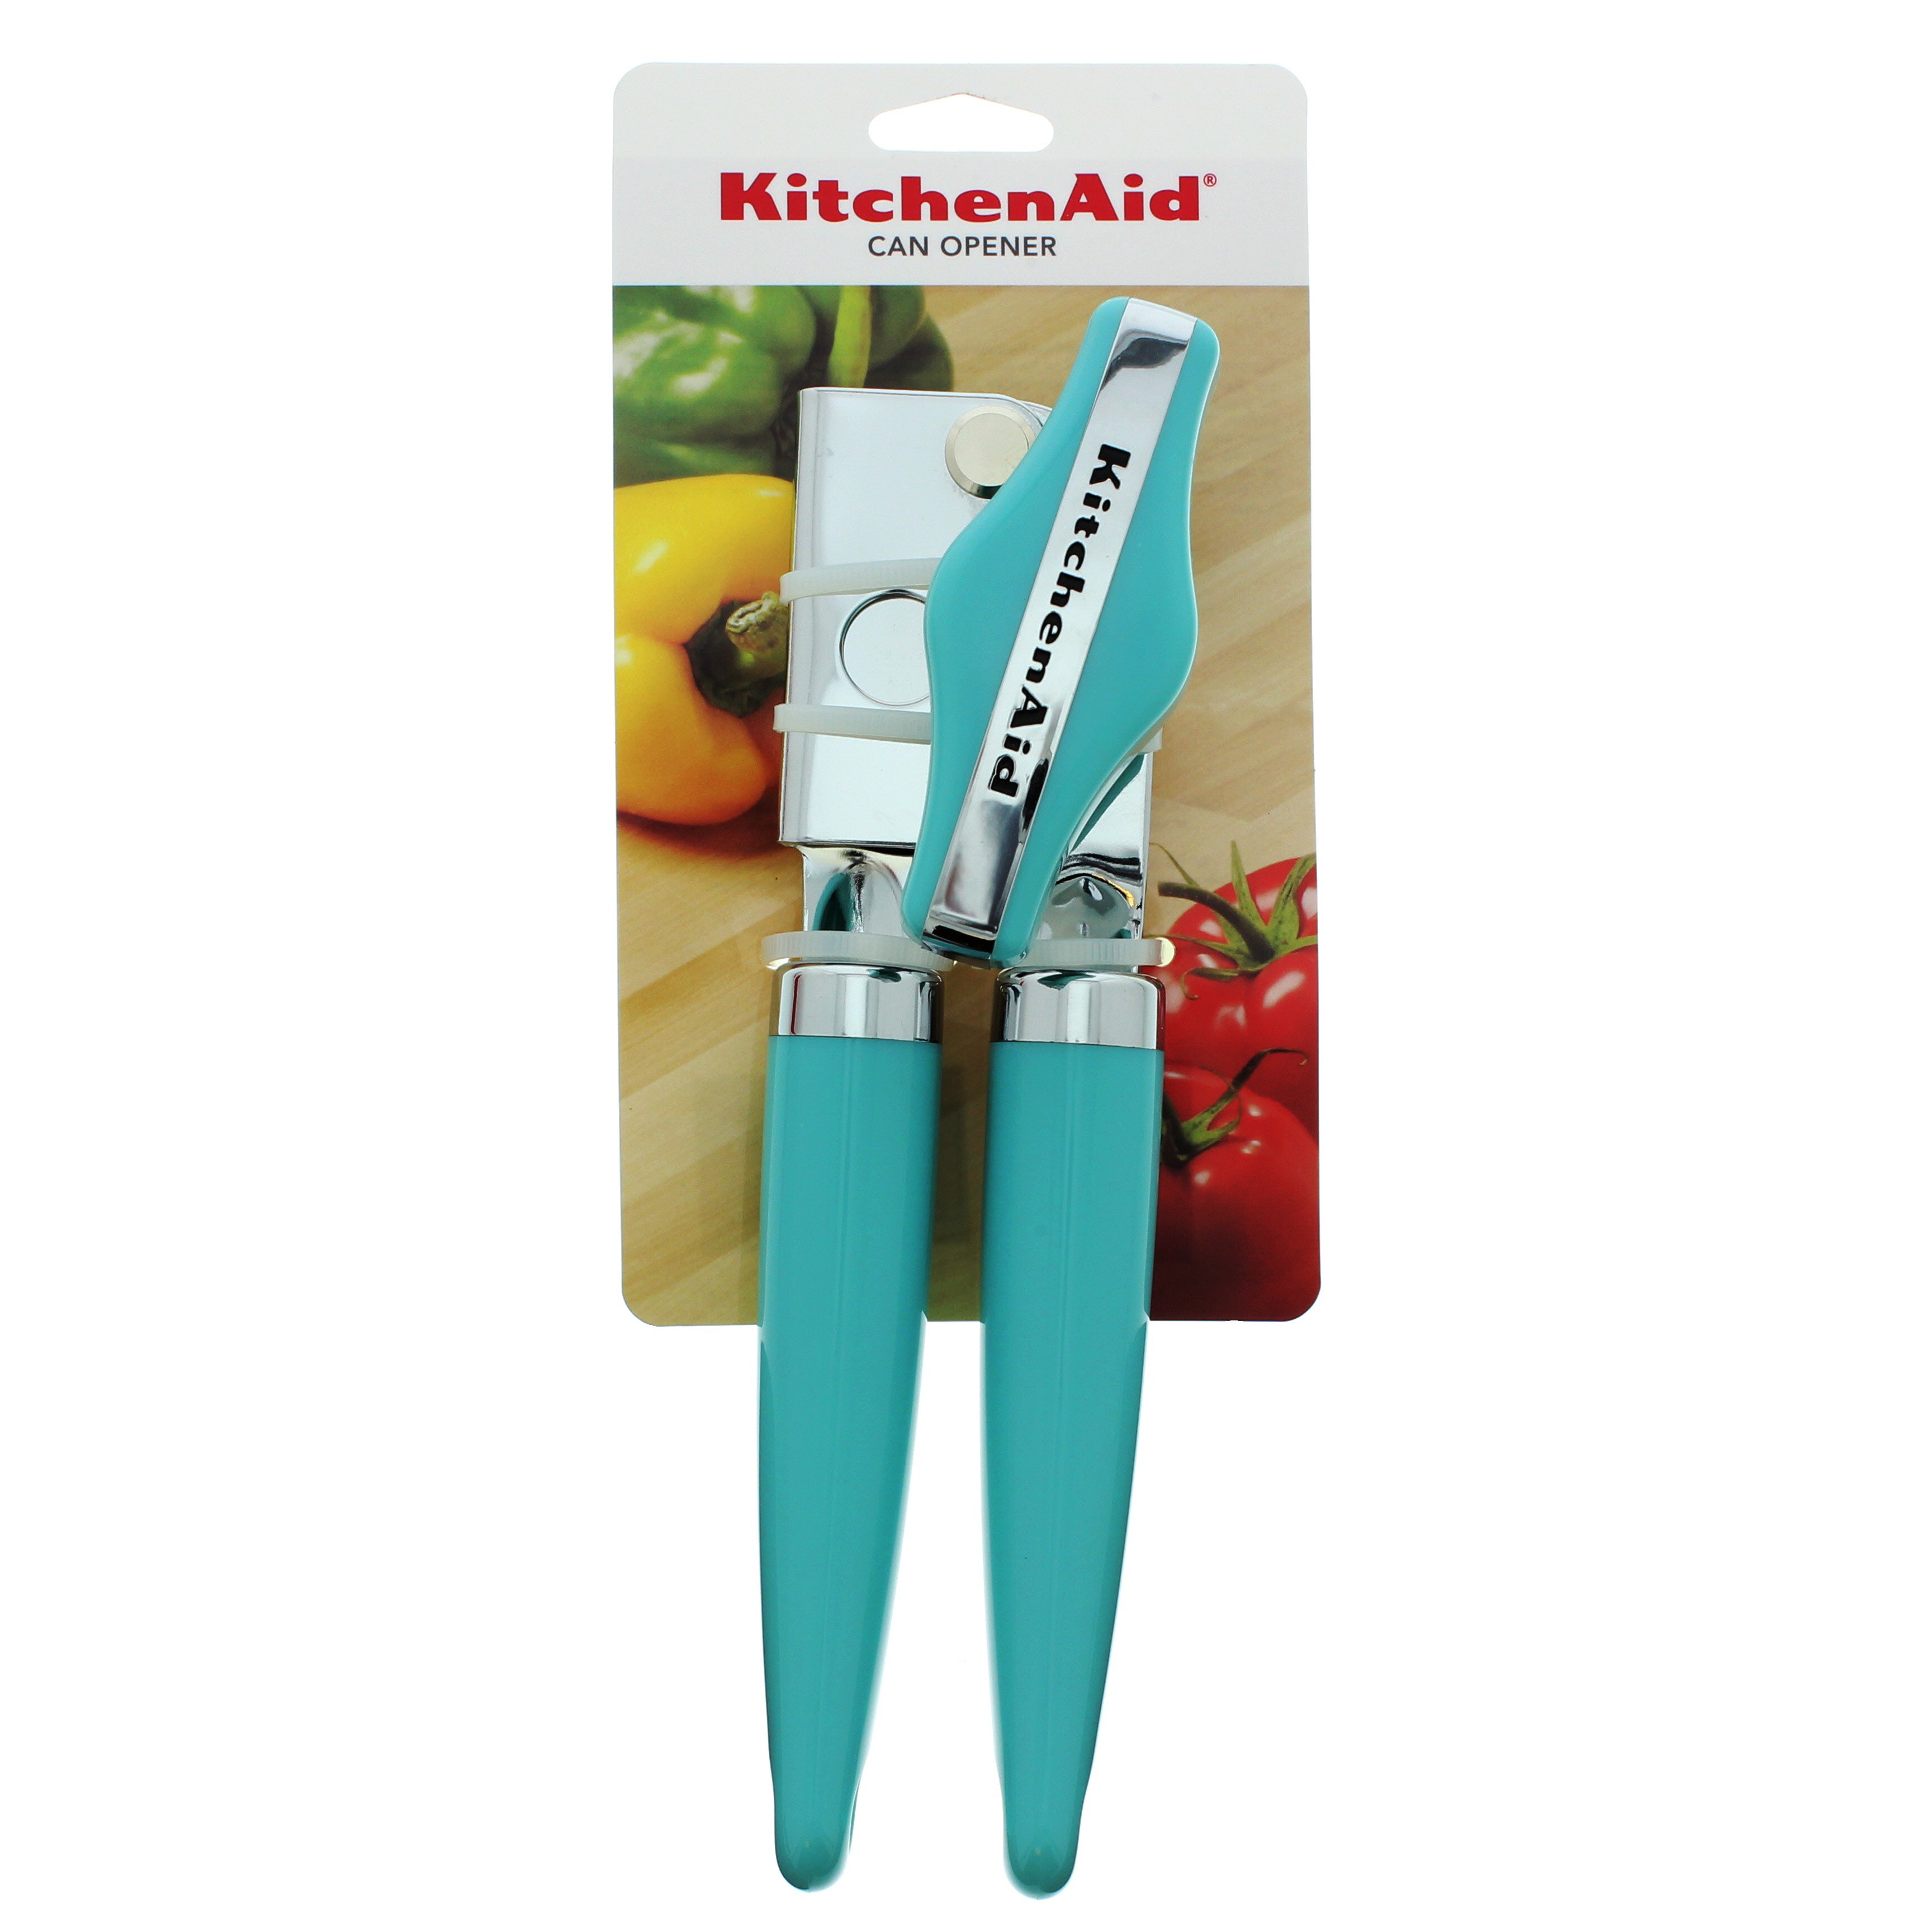 KitchenAid Can Opener, Aqua  Hy-Vee Aisles Online Grocery Shopping